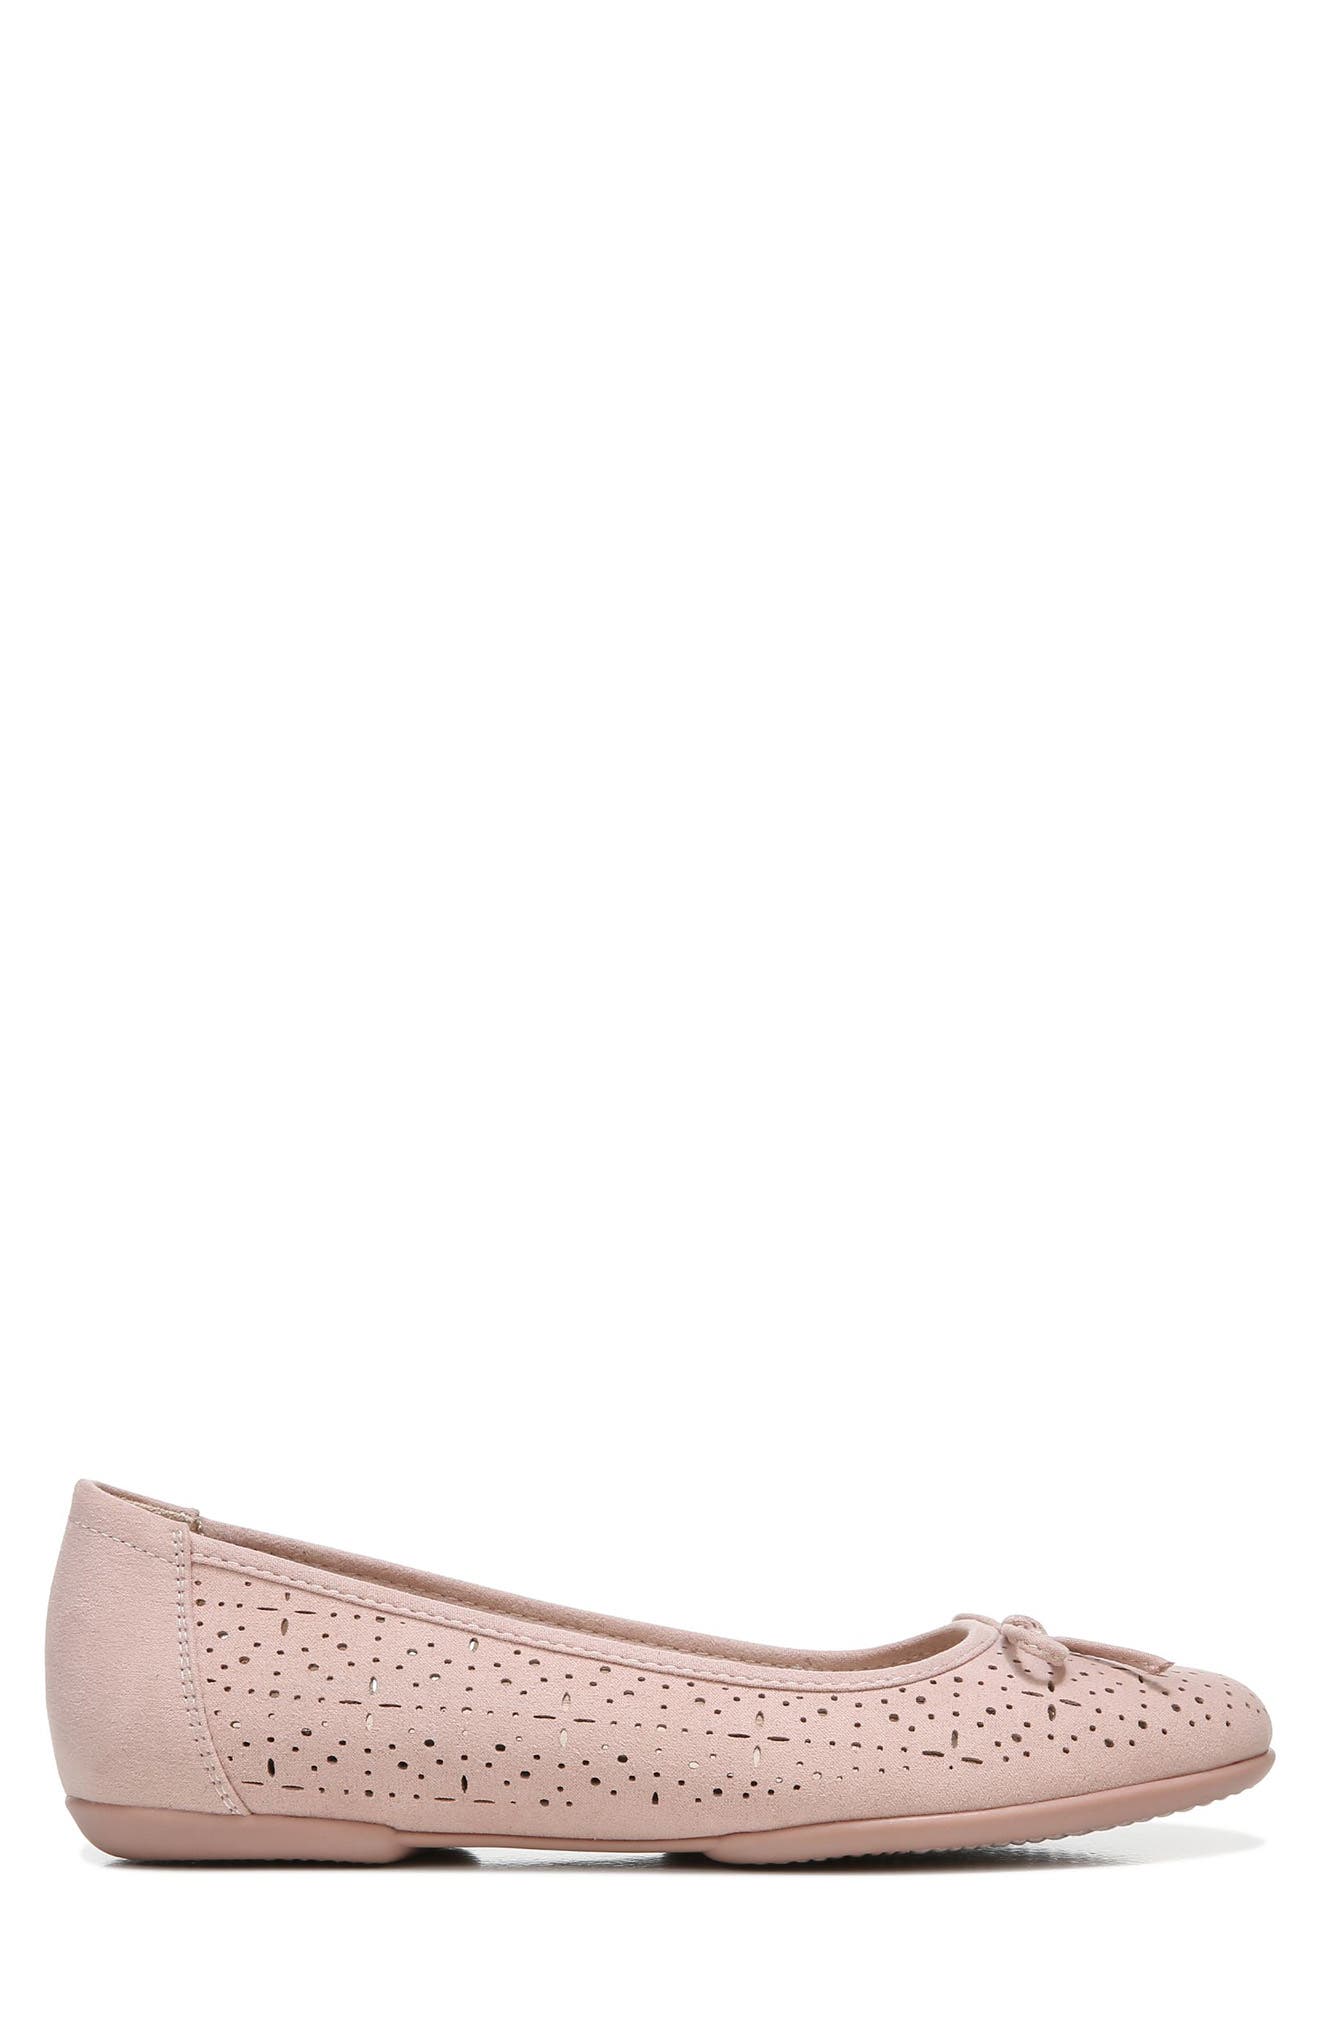 SOUL Naturalizer | Magic Ballet Flat - Wide Width Available | Nordstrom ...